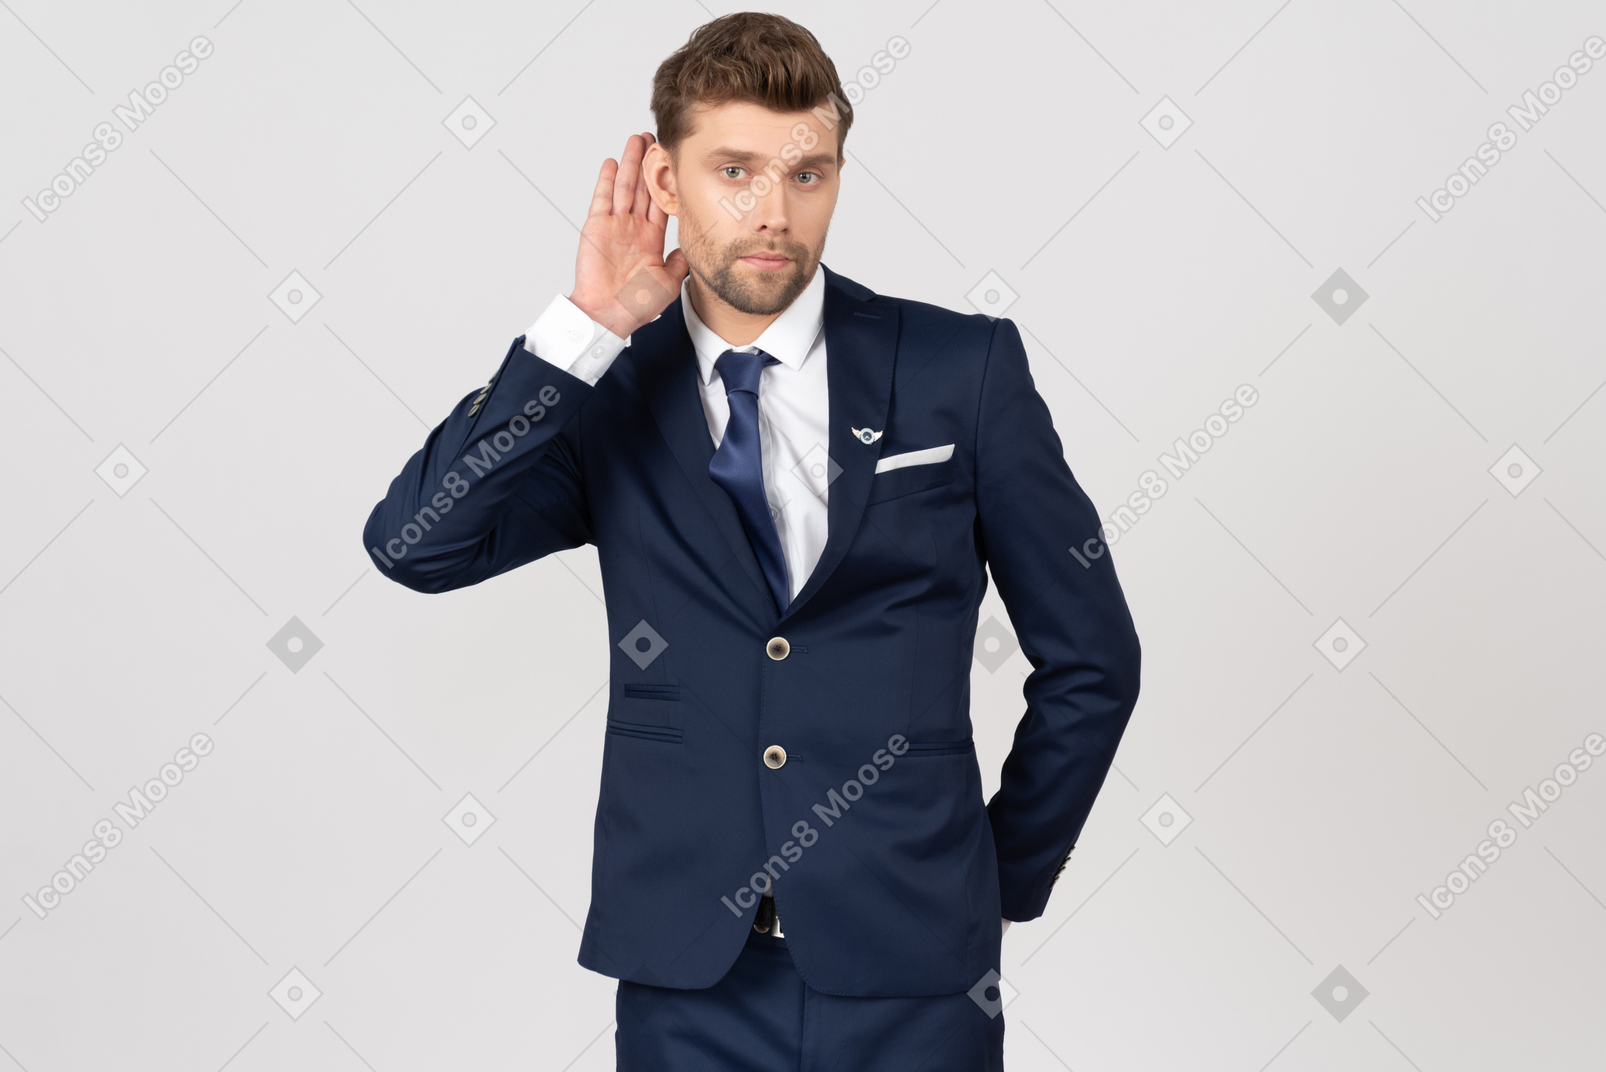 Male flight attendant showing the "i can't hear you" gesture